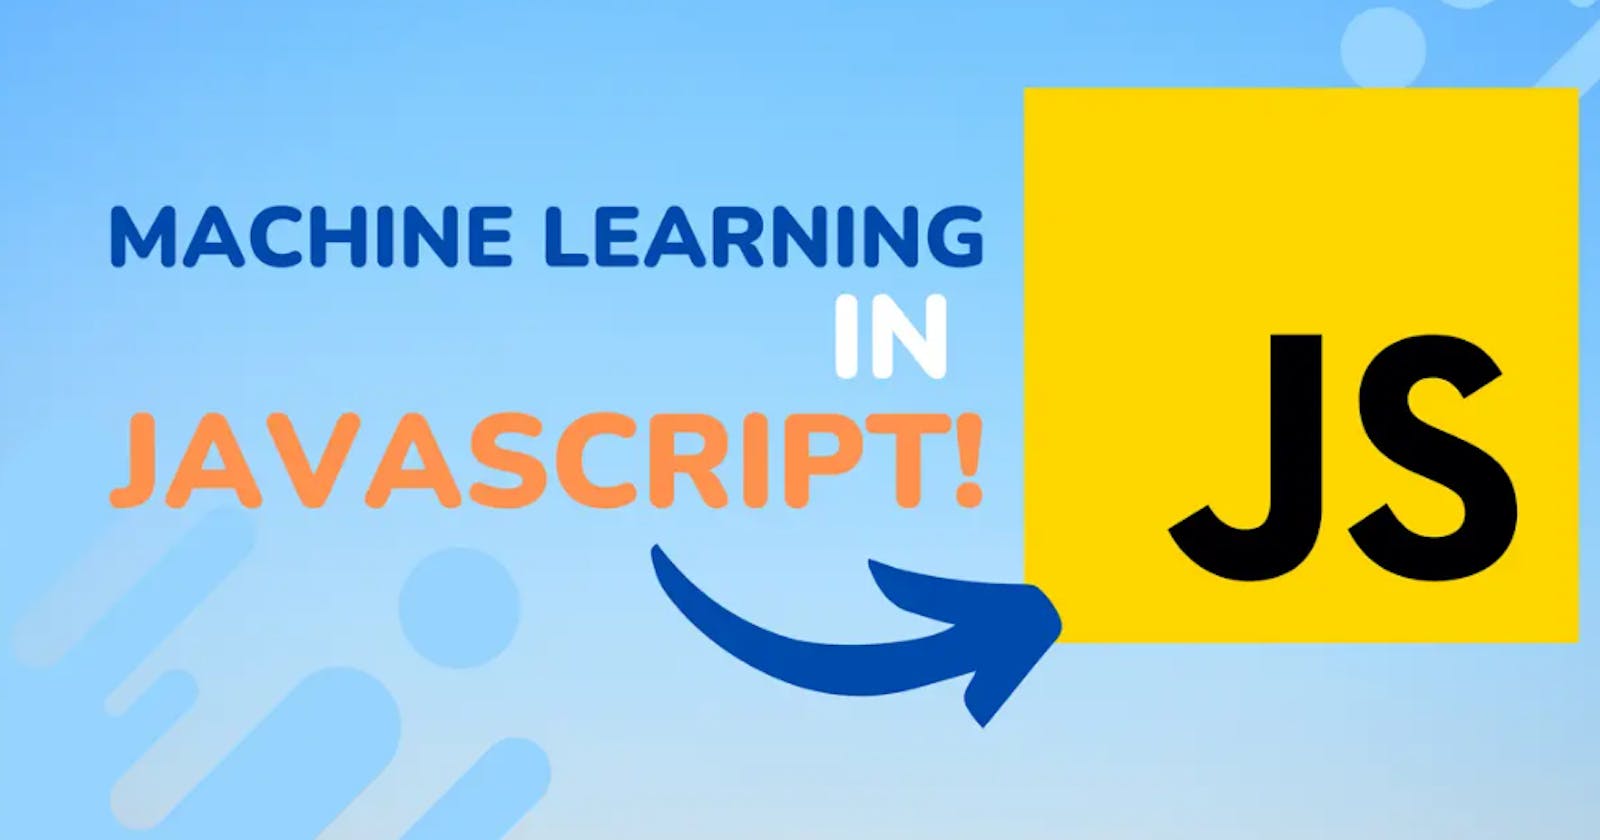 How to do machine learning in JavaScript?